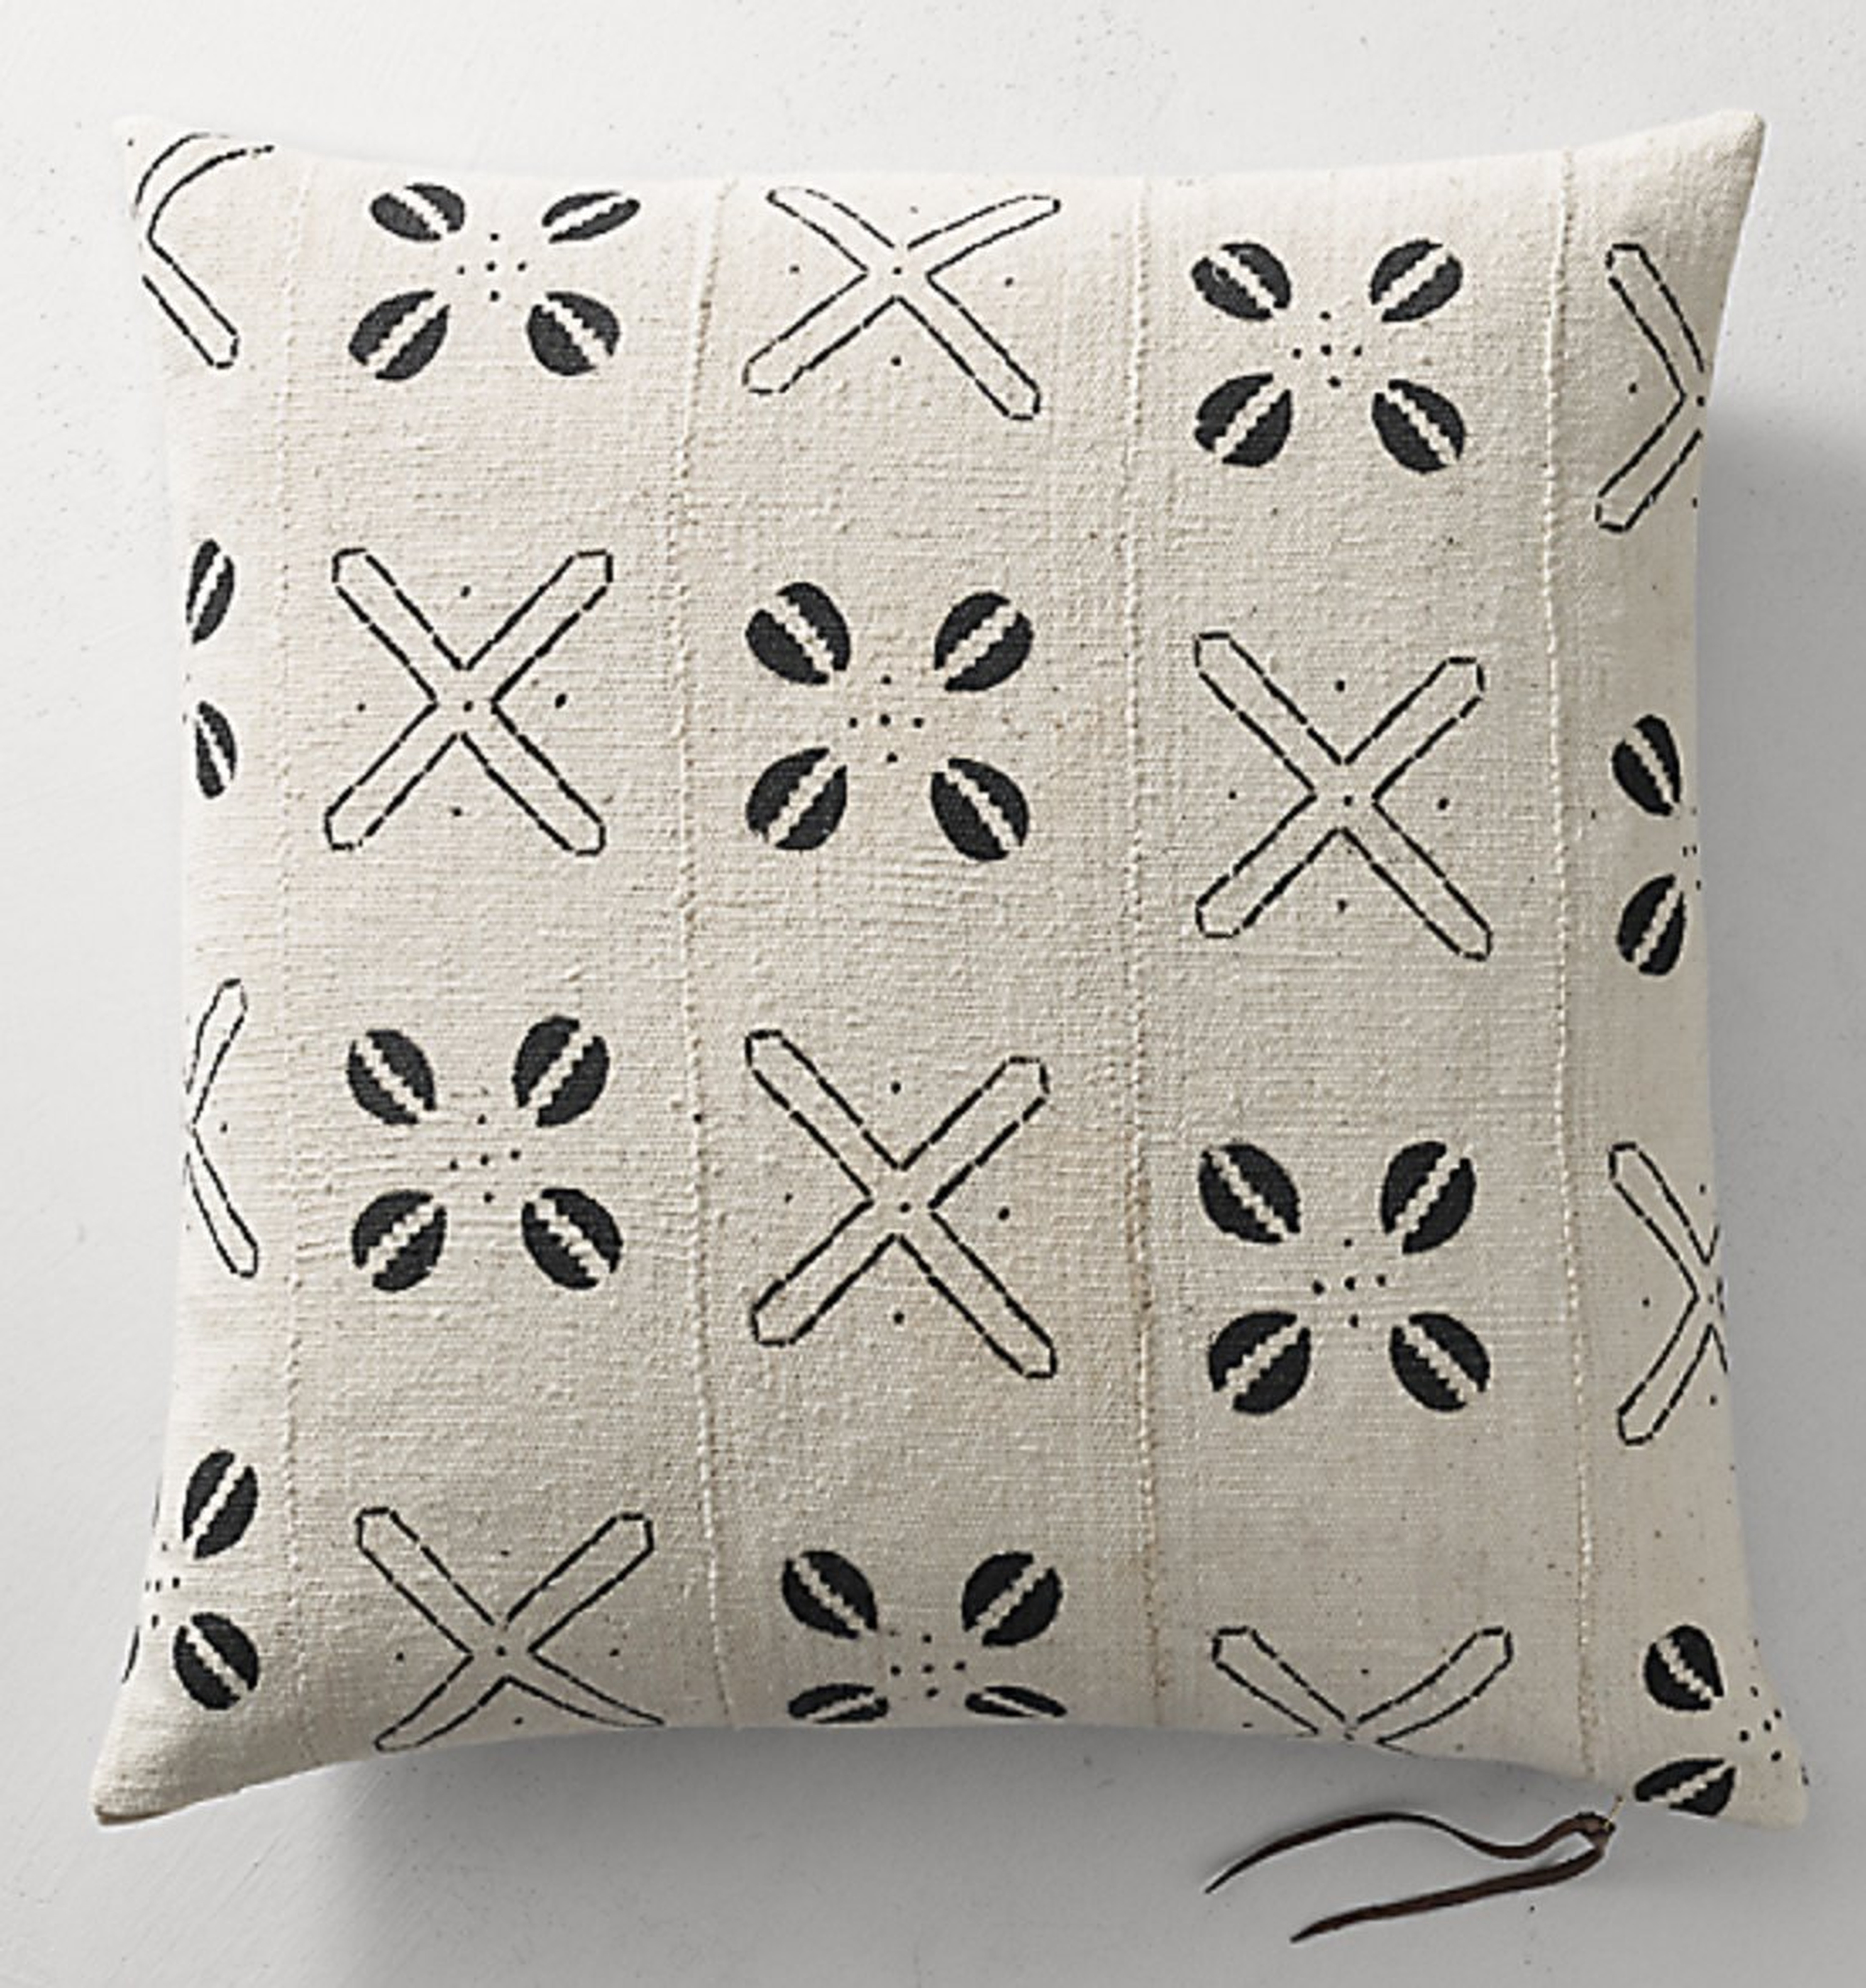 HANDWOVEN AFRICAN MUD CLOTH COWRIE CLUSTER PILLOW COVER - NATURAL - RH